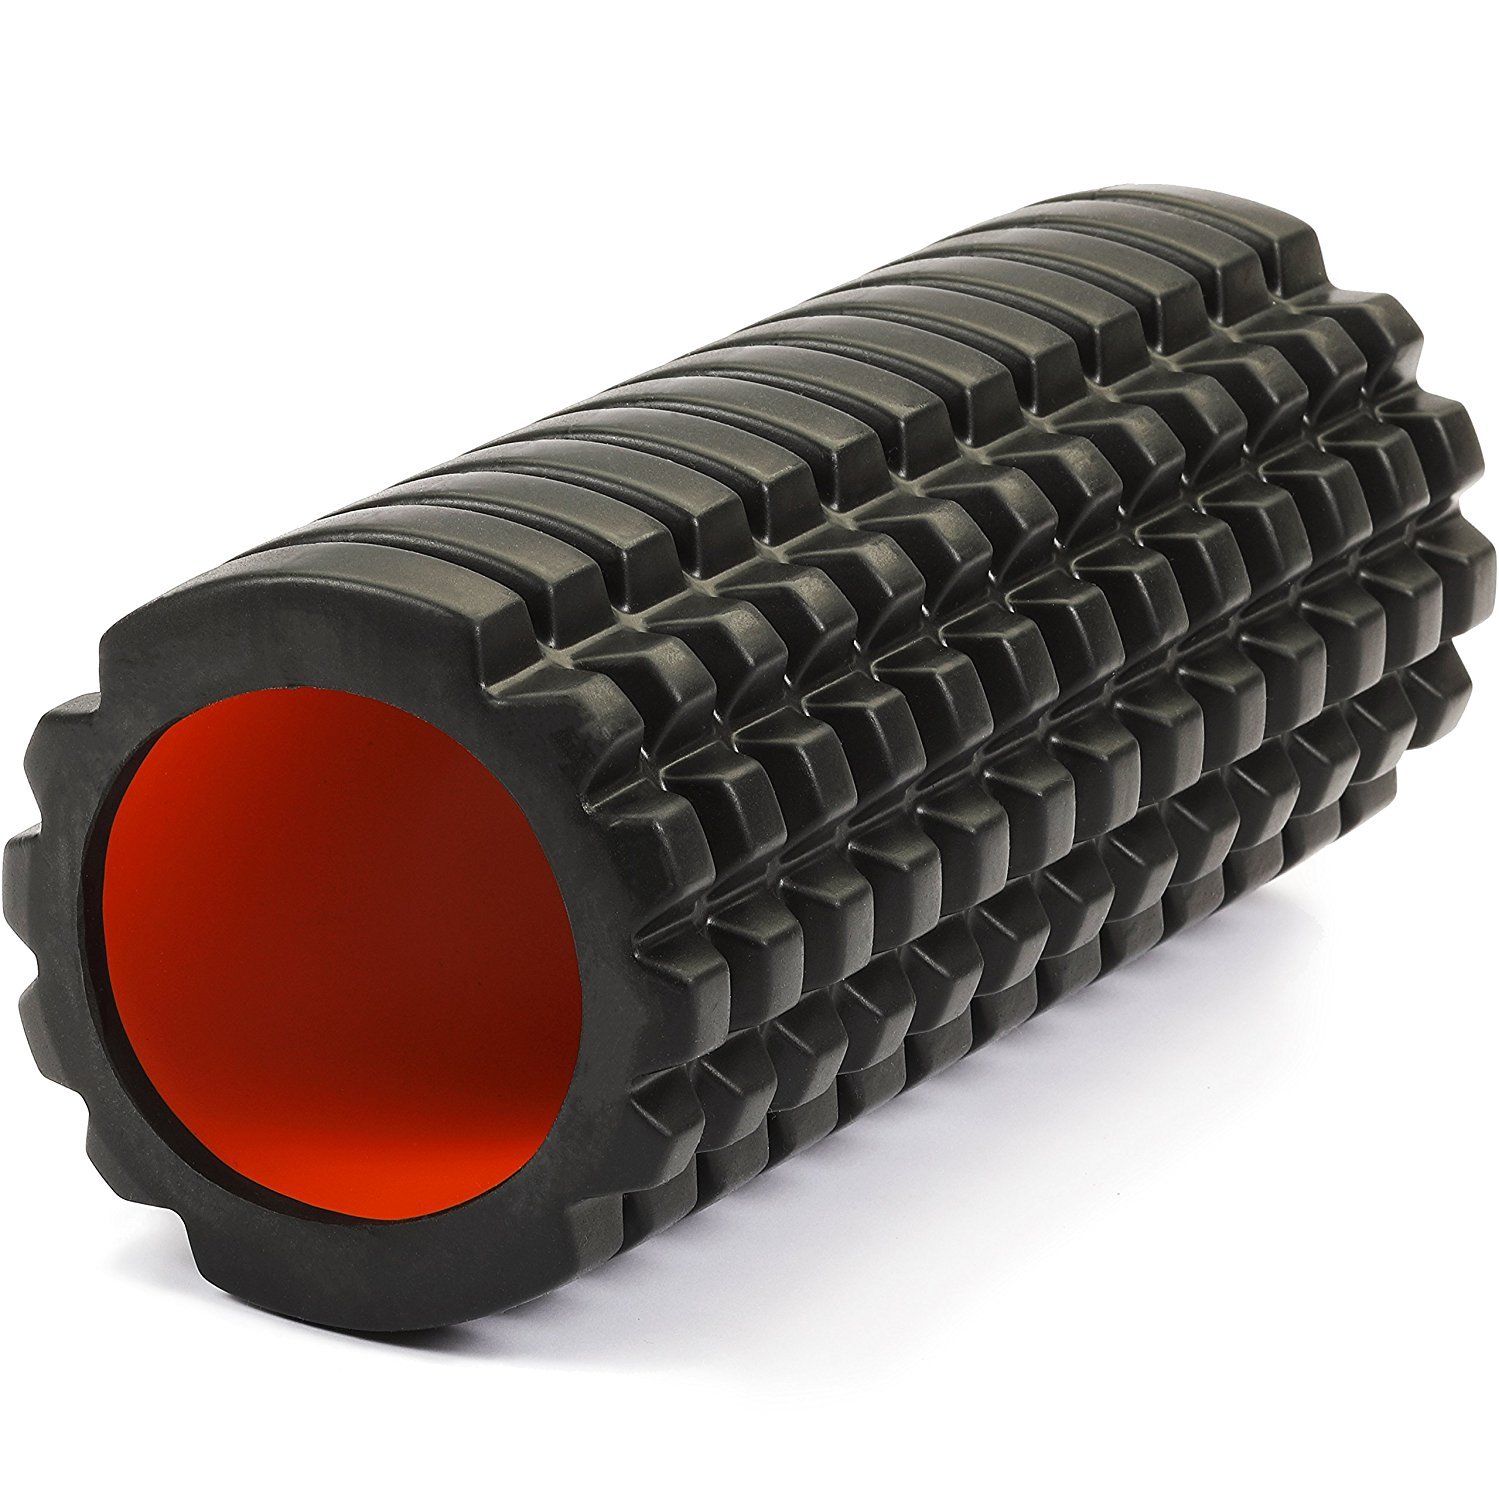 Foam Roller for $13, free shipping